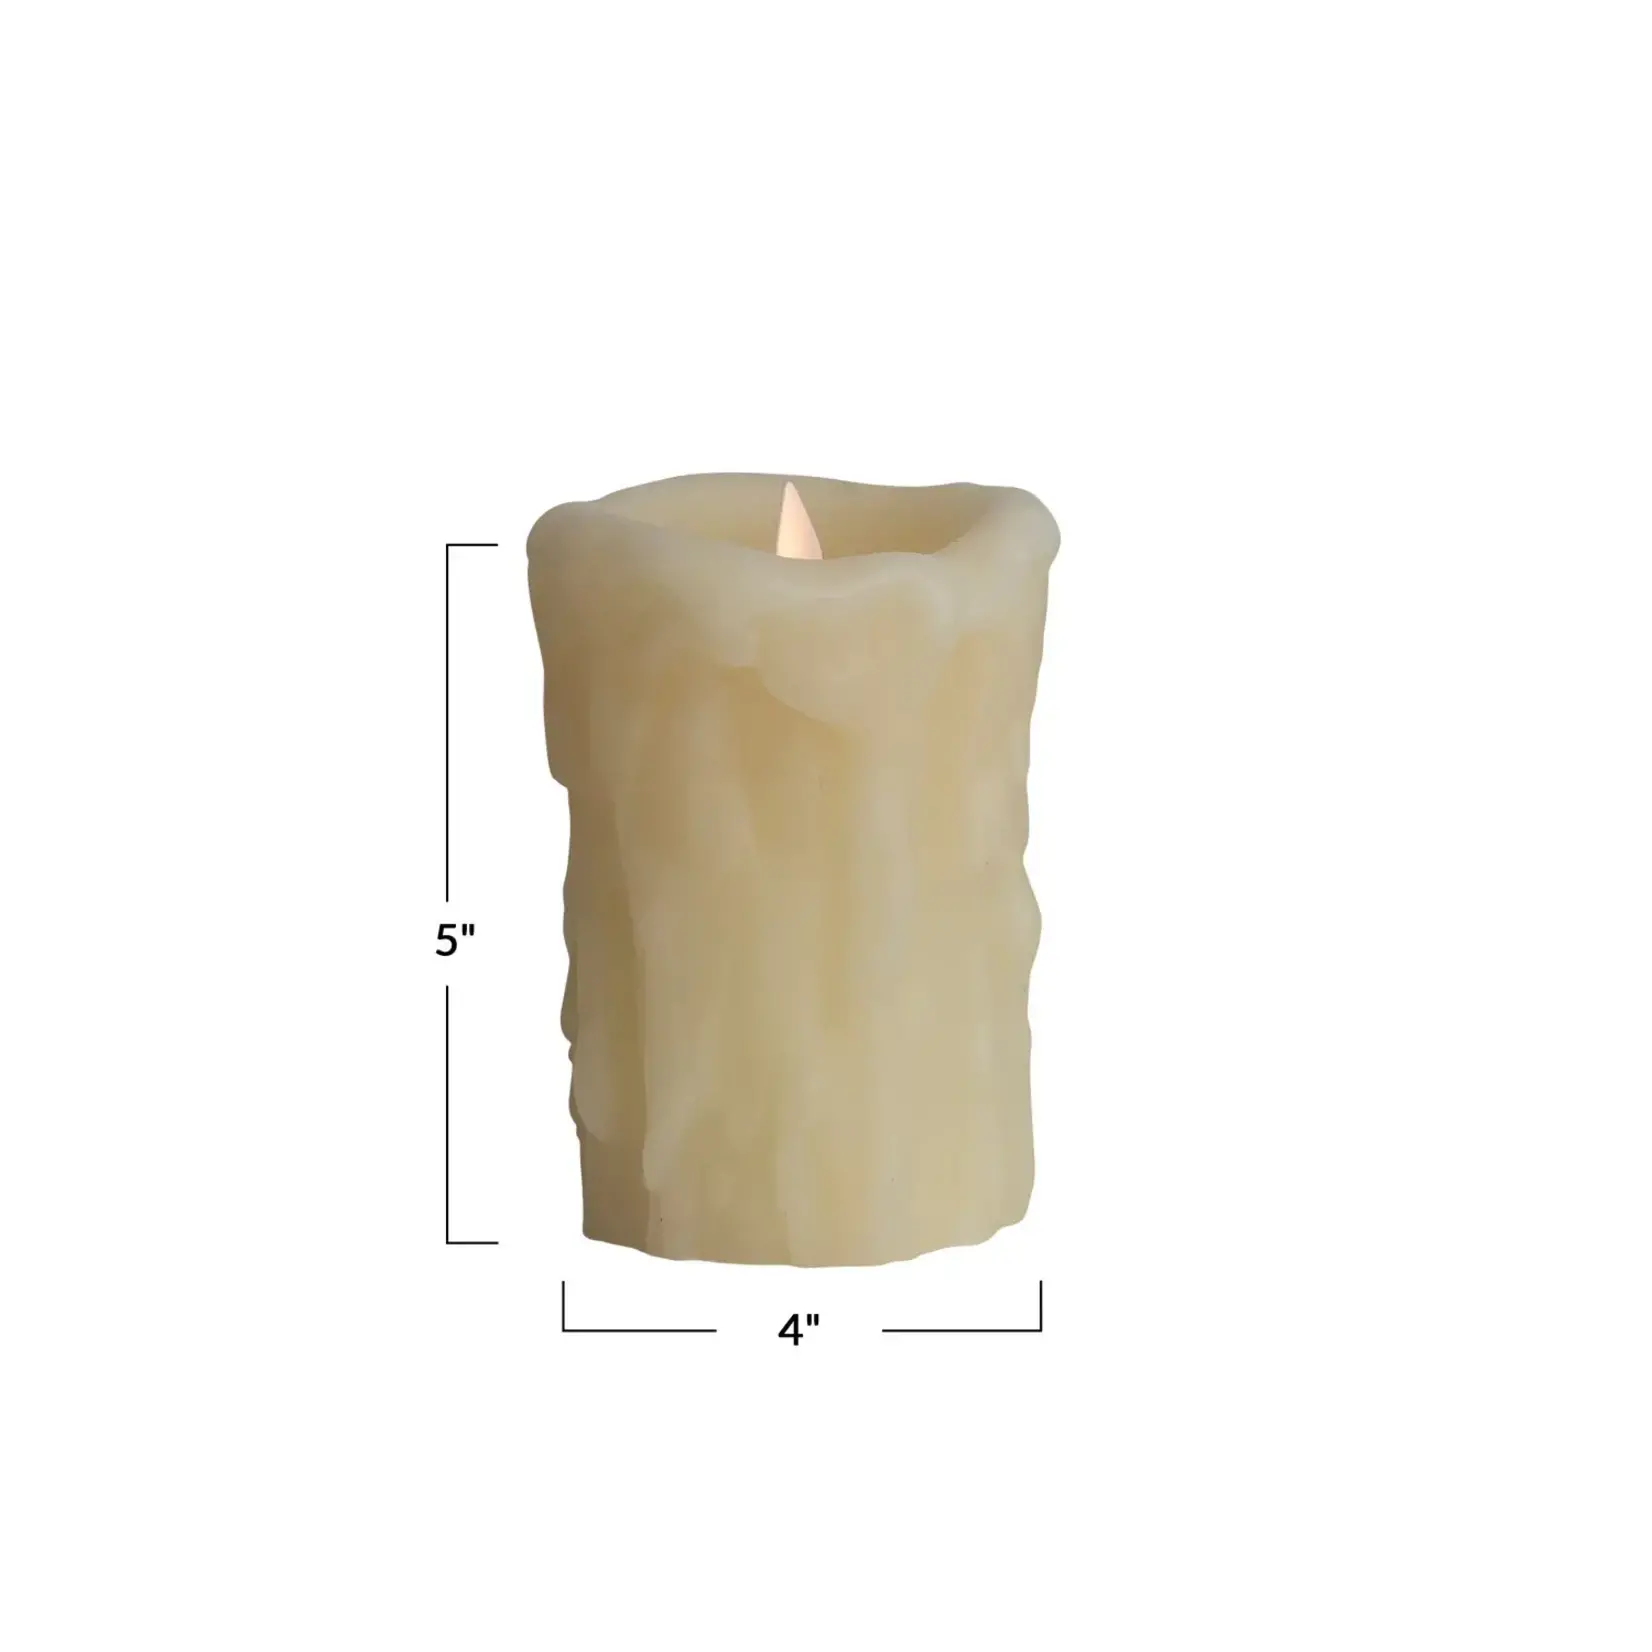 Creative Co-Op Flameless LED Wax Pillar Candle w/ 6 Hour Timer, Cream Color (Requires 3-AAA Battery)